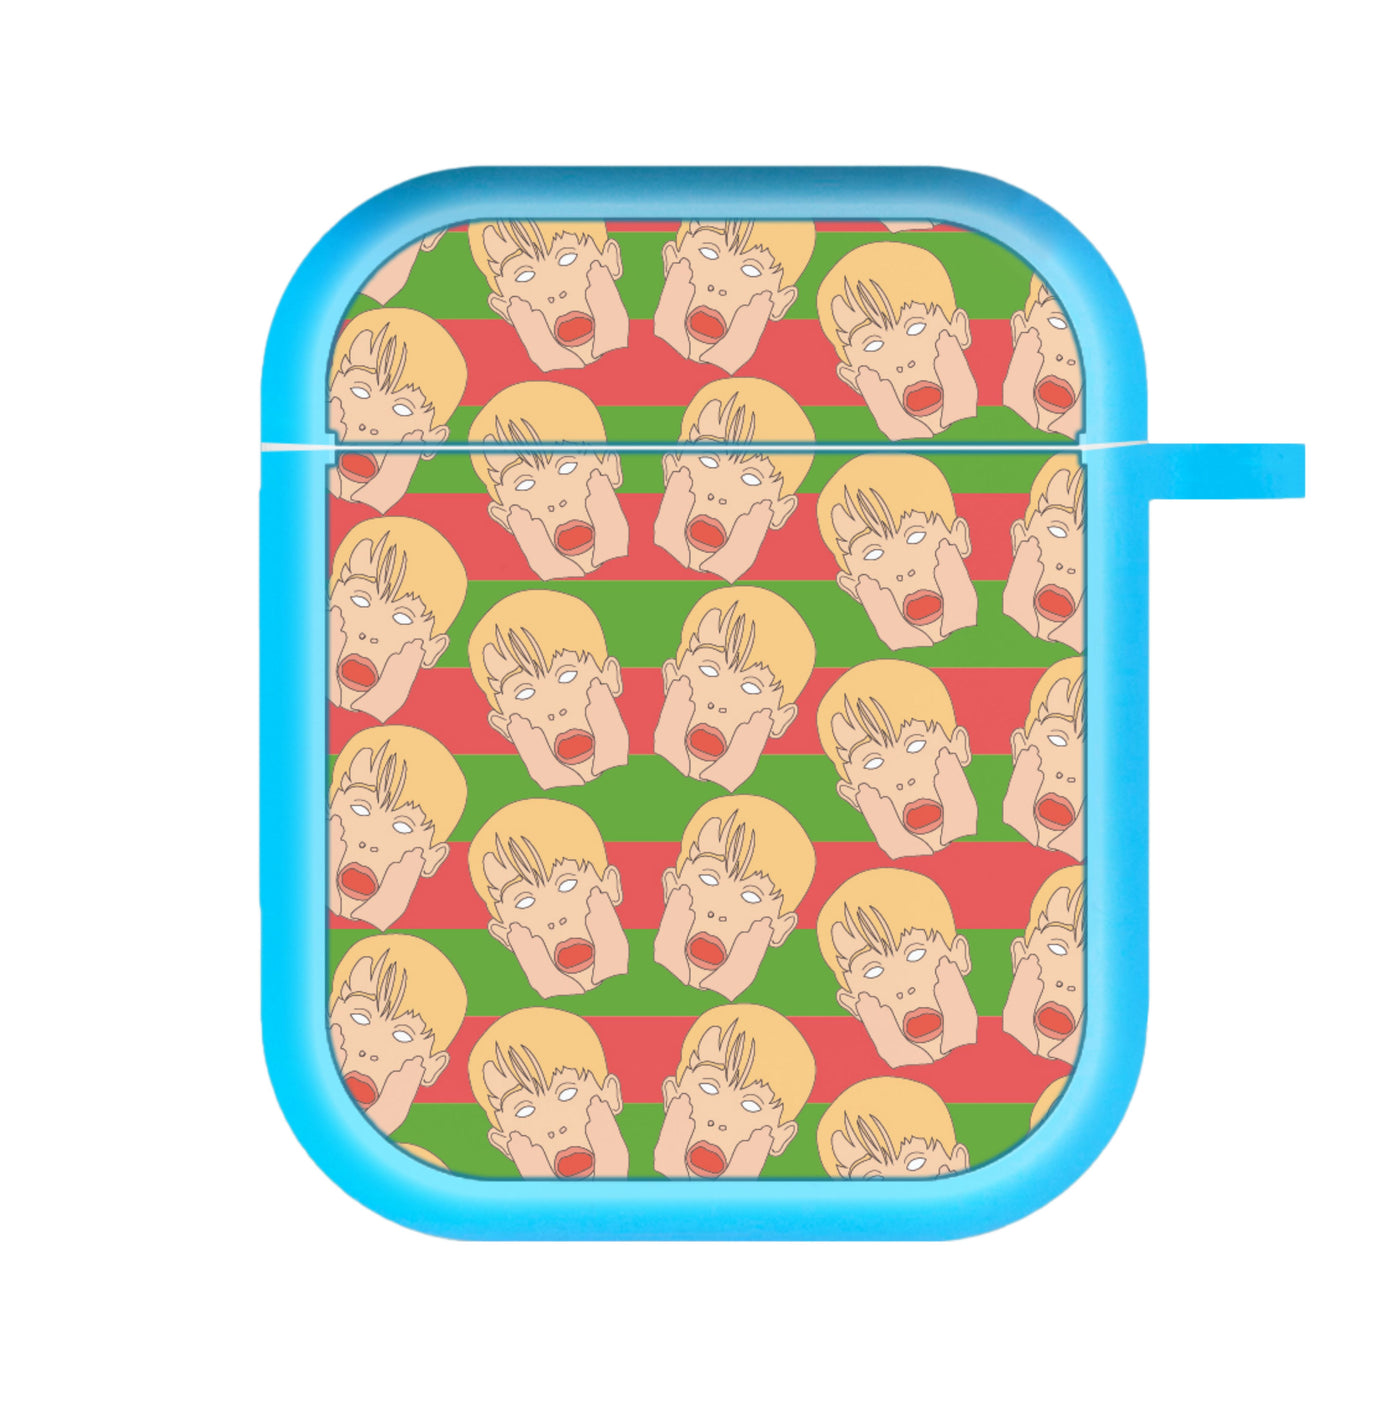 Kevin Pattern - Home Alone AirPods Case